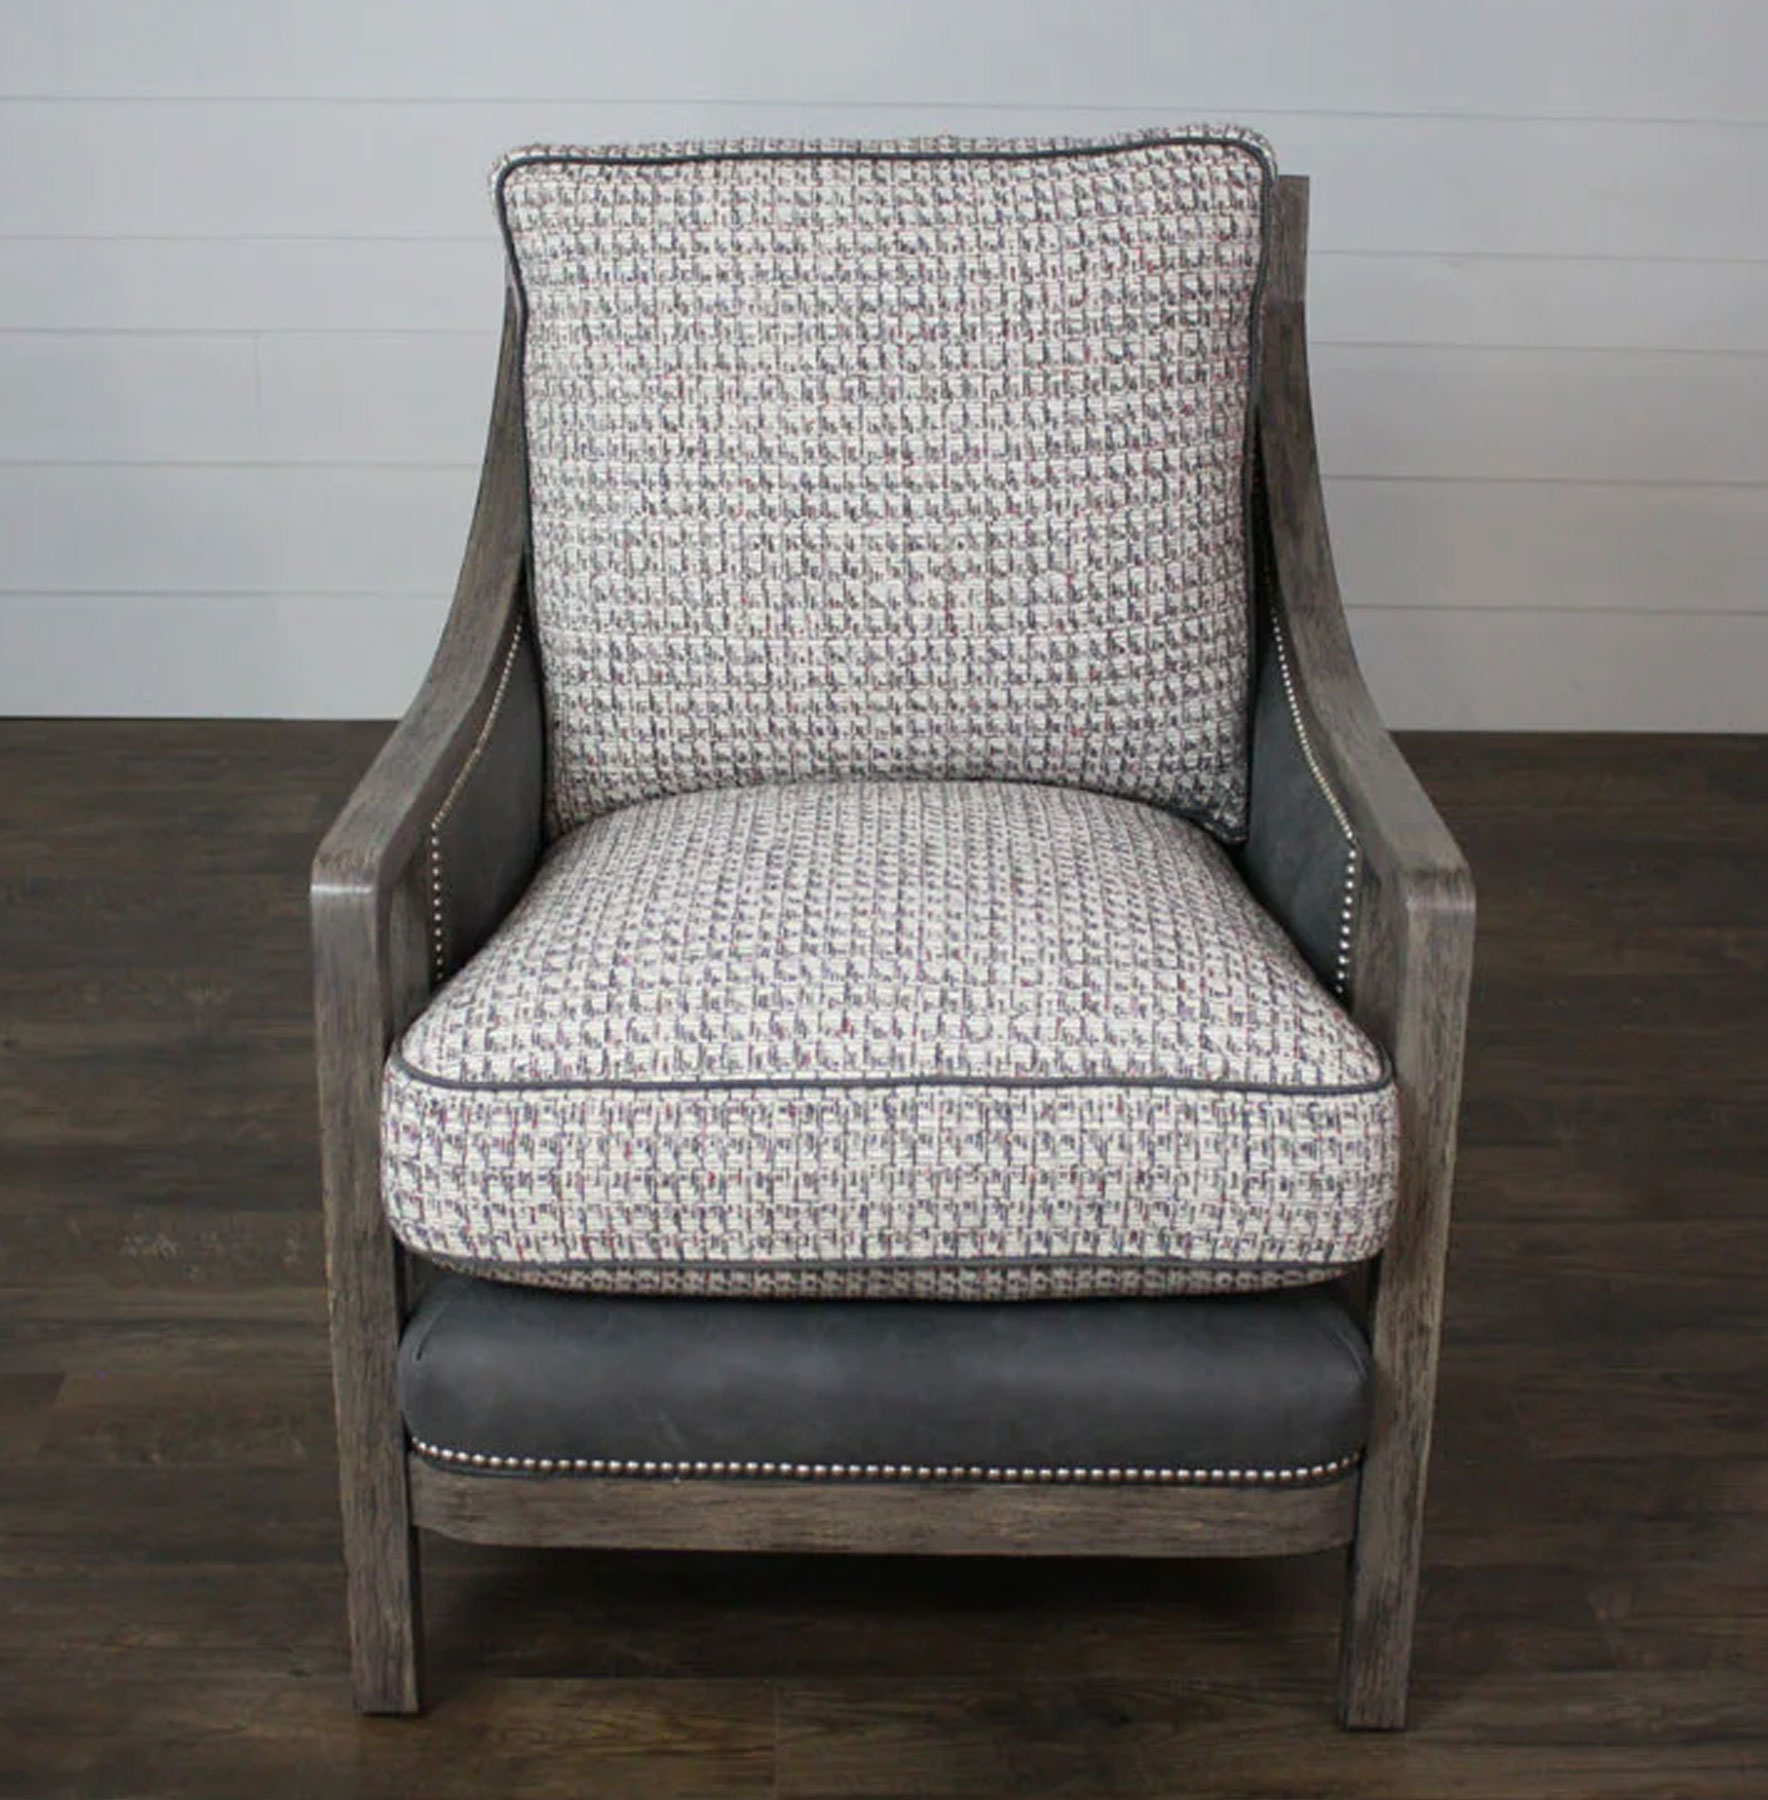 Our House 725 Monastery Foyer Lounge Chair in Slate Roof Leather and Novelty Fabric